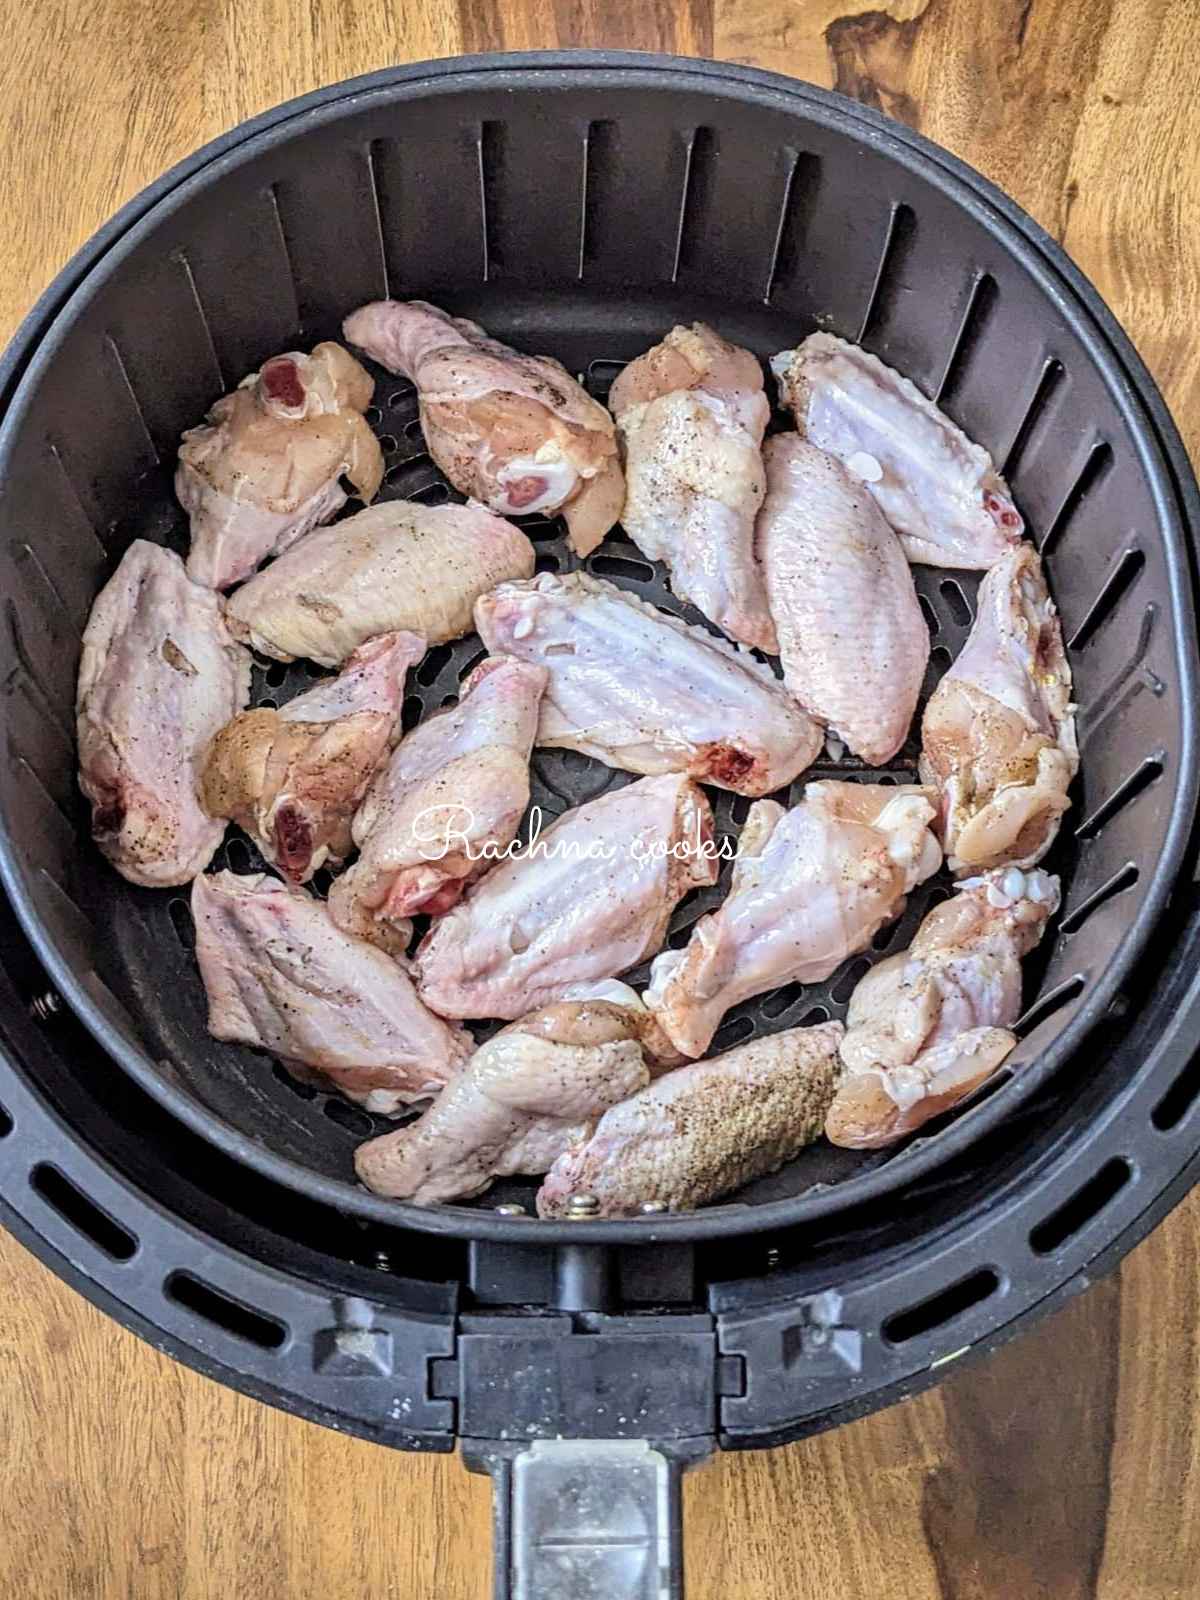 Chicken wings rubbed with salt and pepper in air fryer basket.